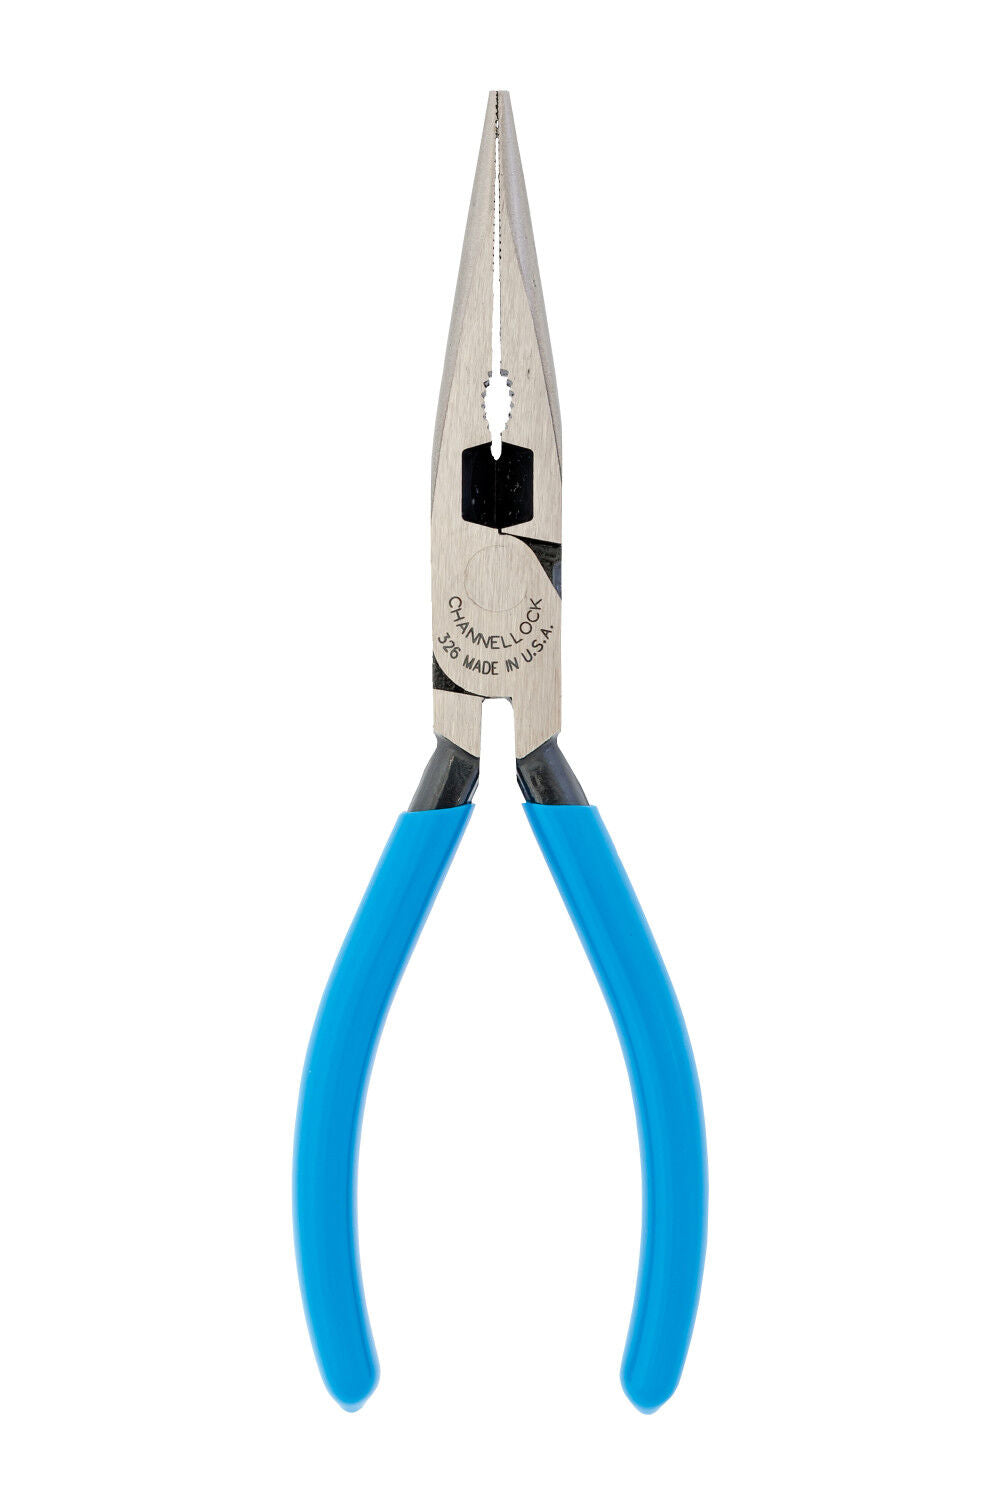 6in Long Nose Plier with Side Cutter 326